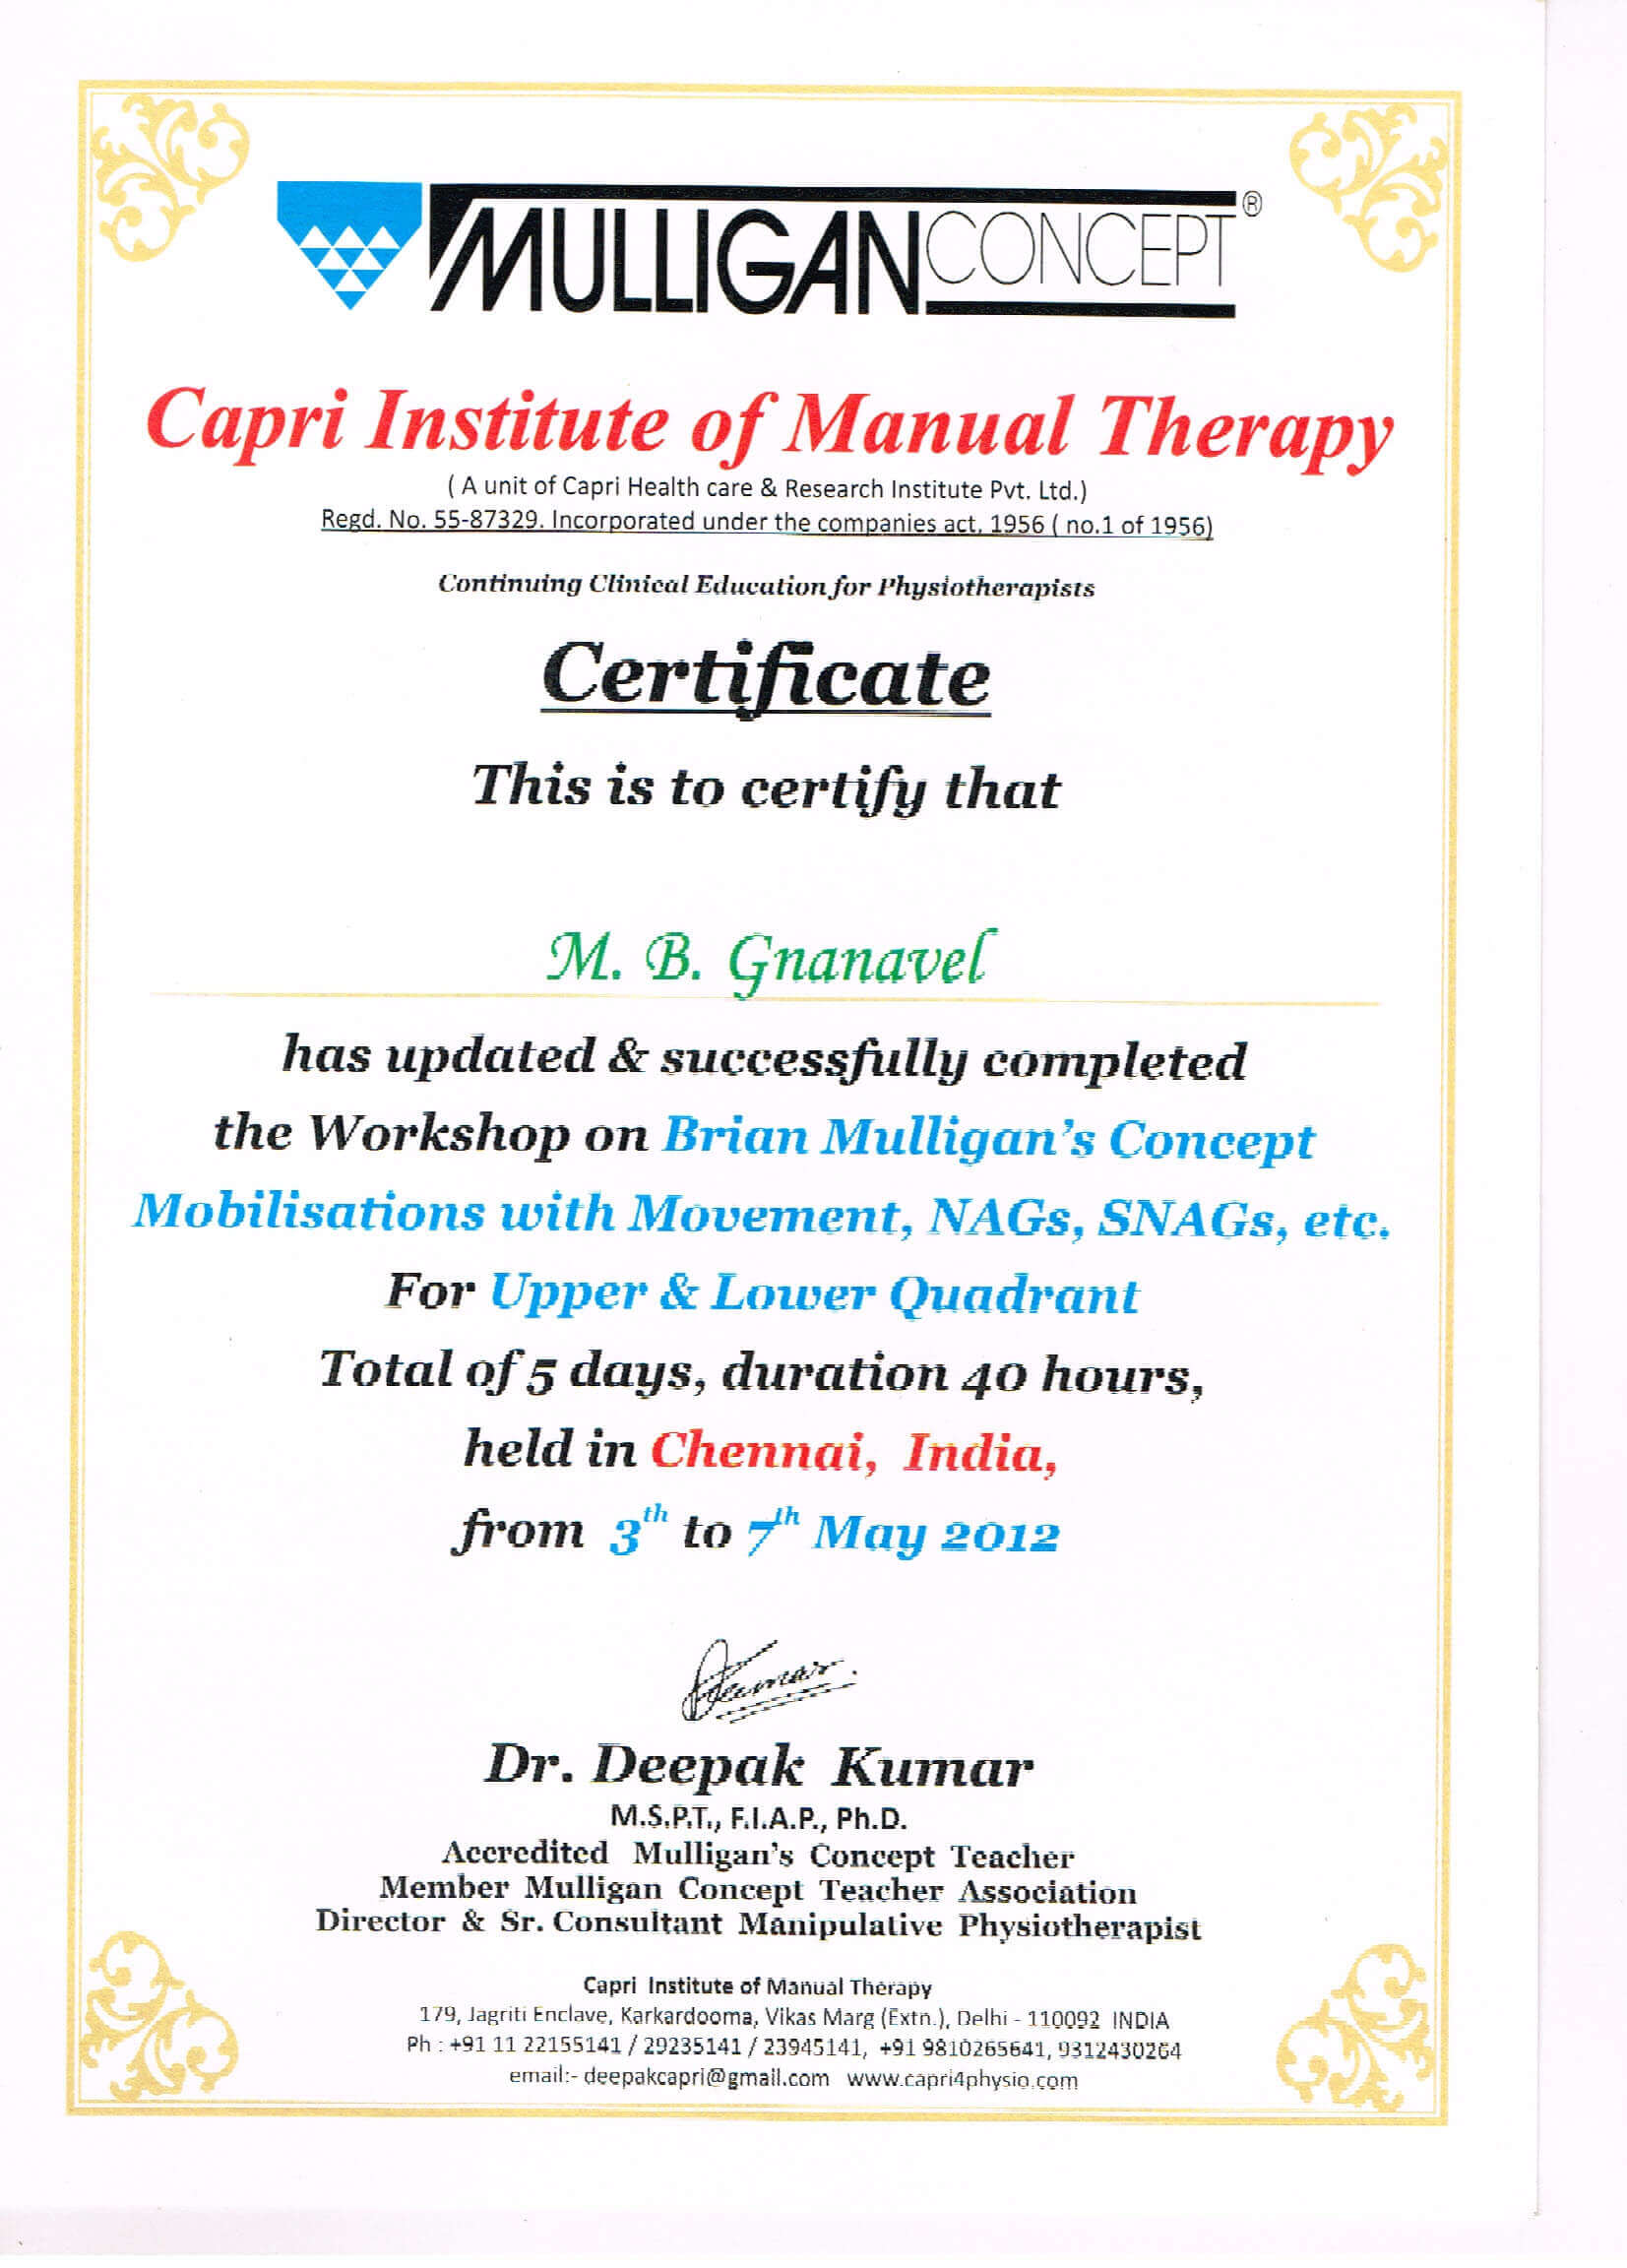 gnanavel-manual-therapy-certificate